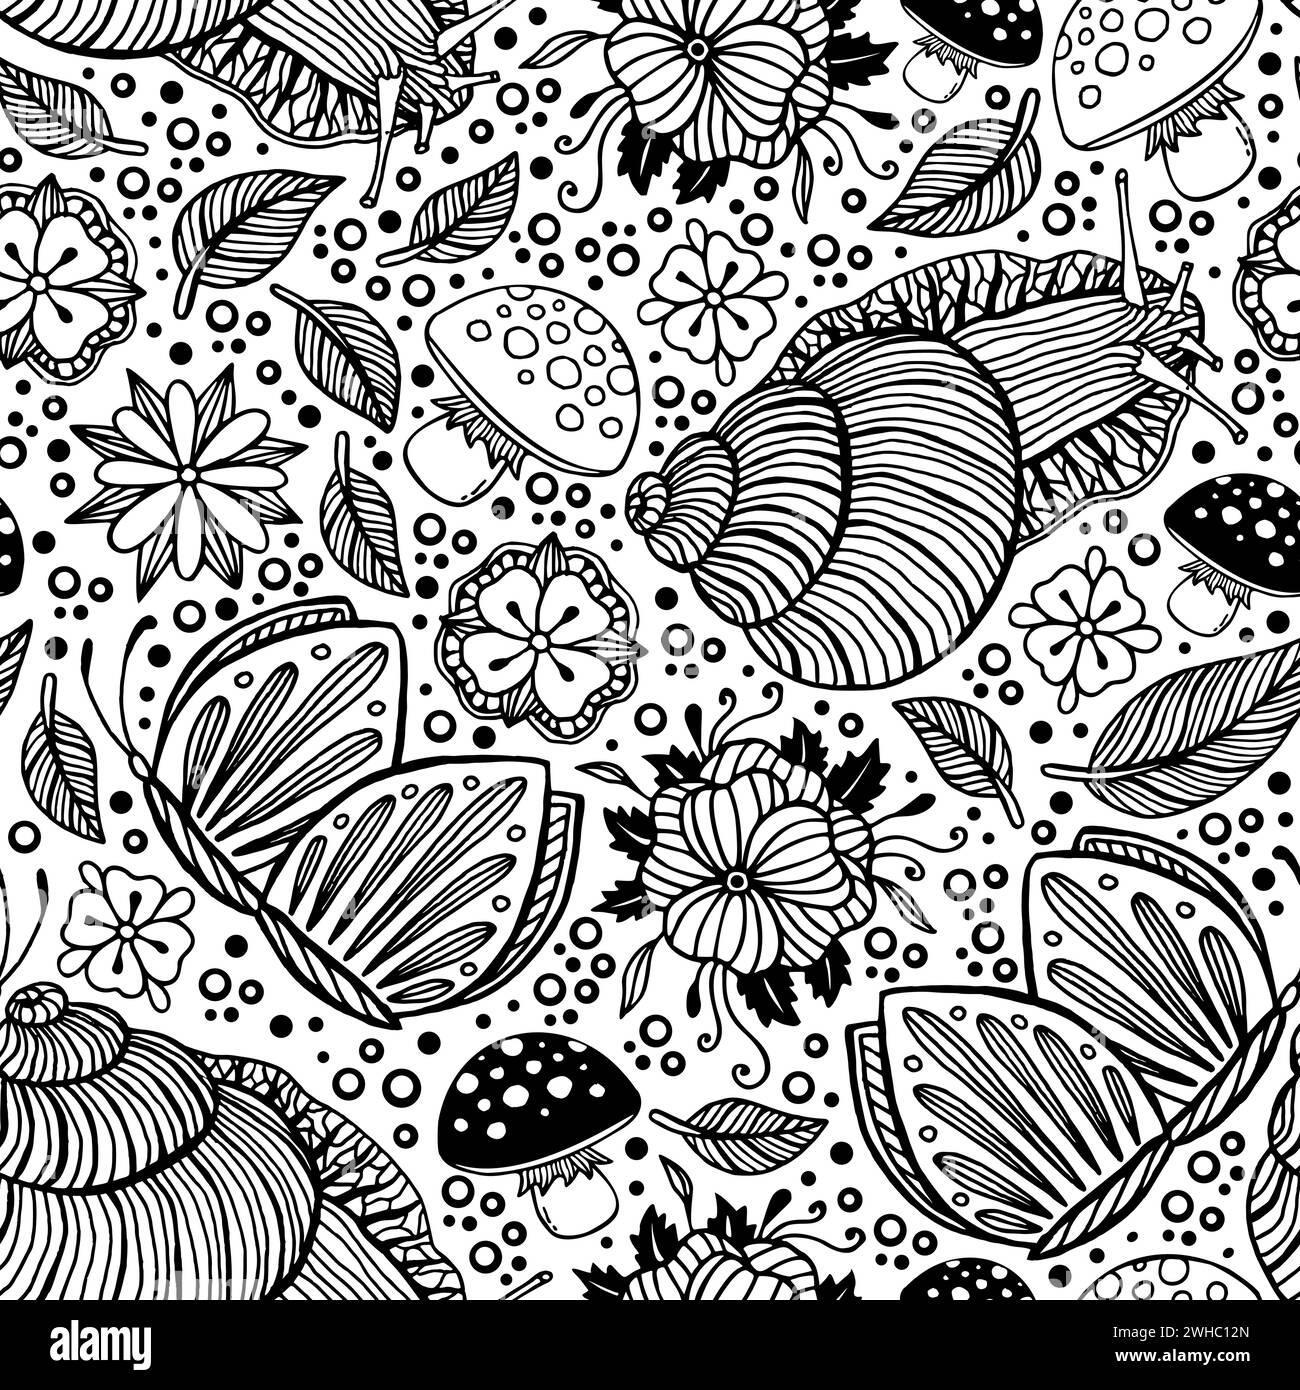 Black and White Hand Drawn Snails Leaves and Flowers. Vector Seamless Pattern Stock Vector